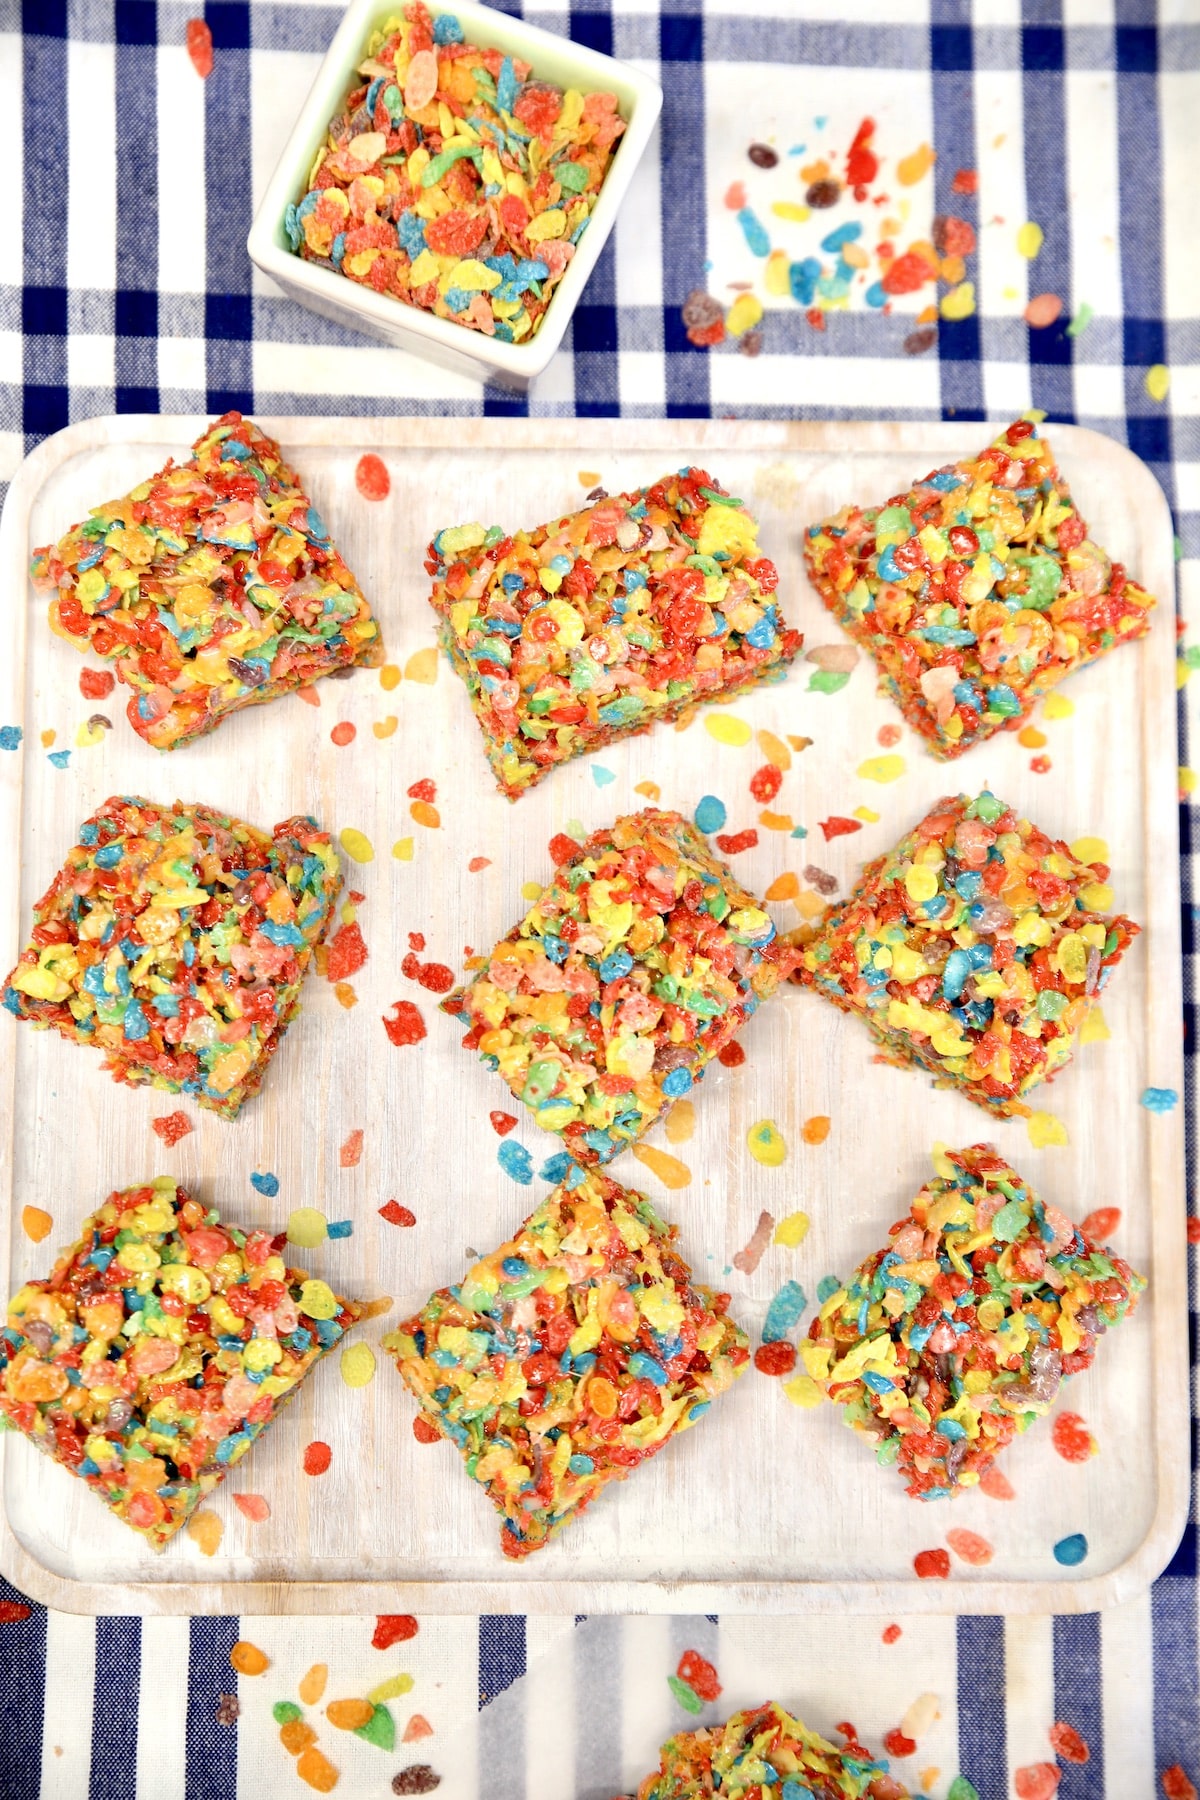 Fruity pebbles bars cut into squares on a platter.